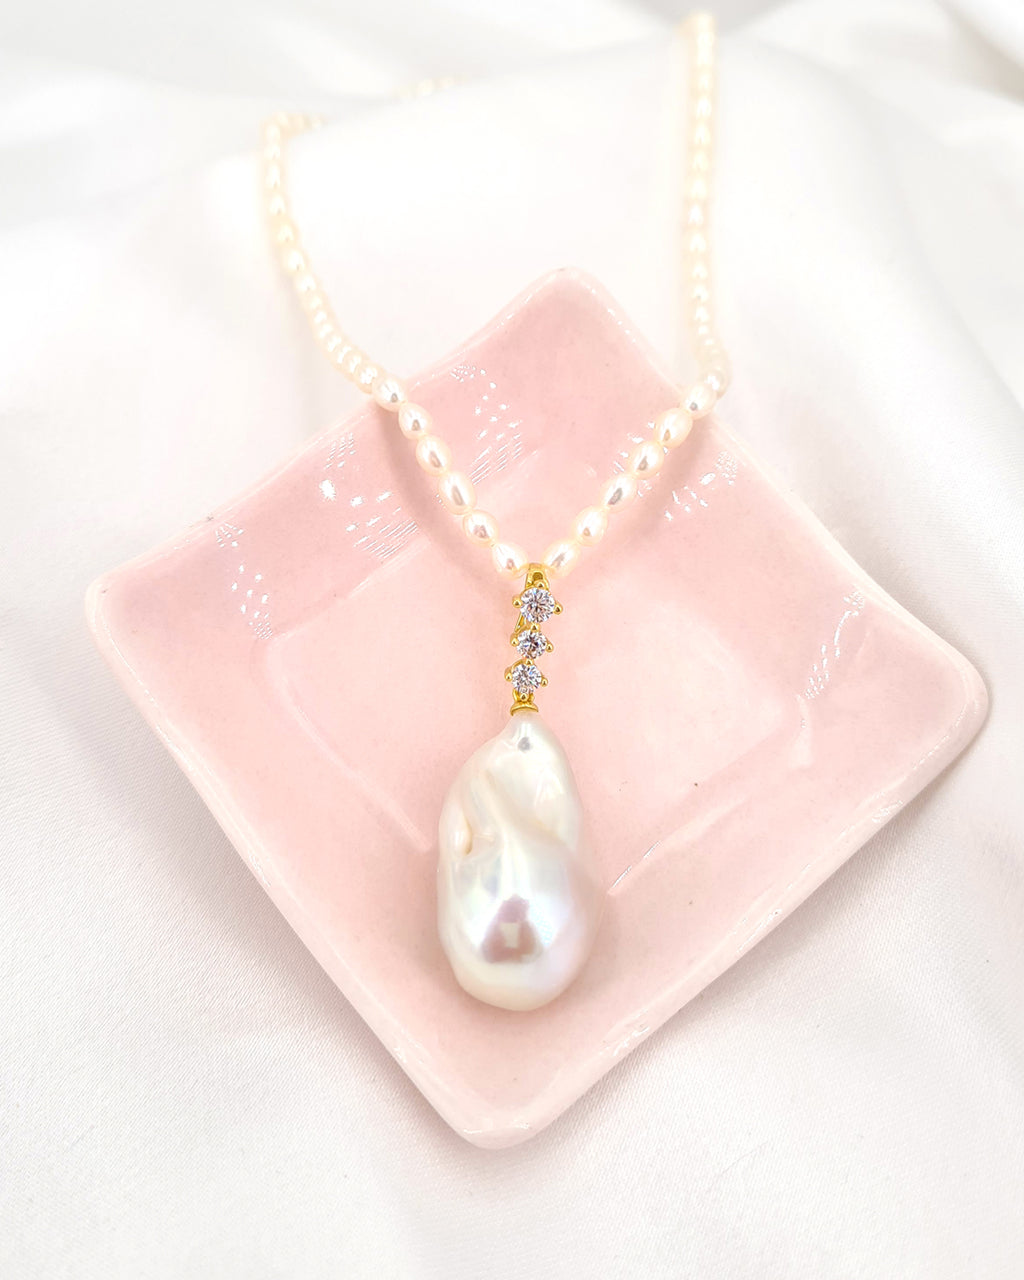 Rainbow Iridescent White Baroque Pearl Necklace - Detachable Clasp | Bride Wedding Pearl Jewerly